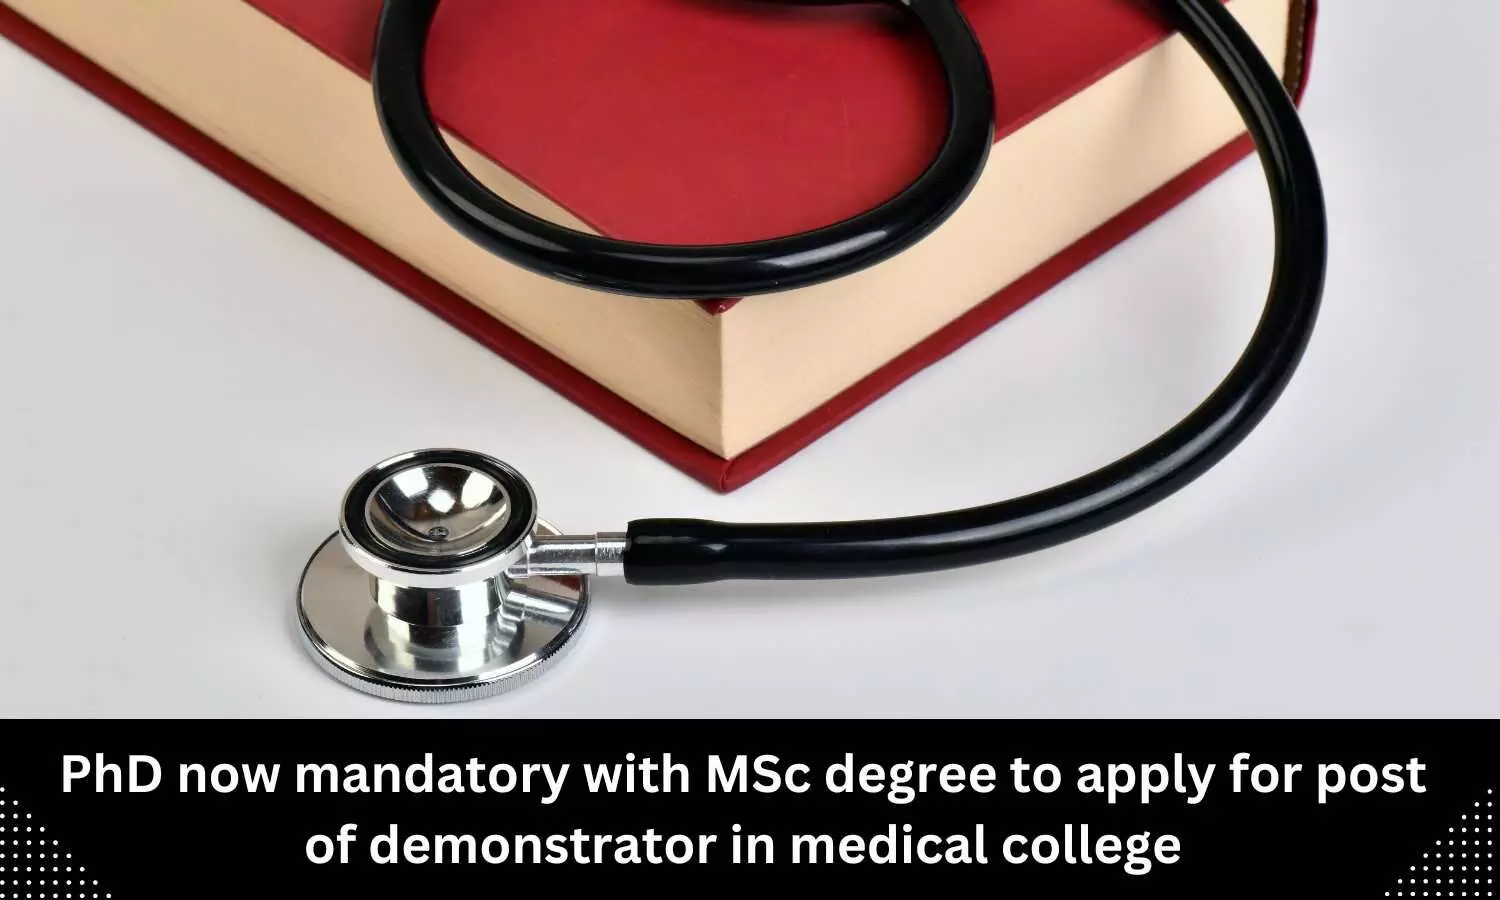 PhD must for MSc degree holders to apply for demonstrator post in medical college